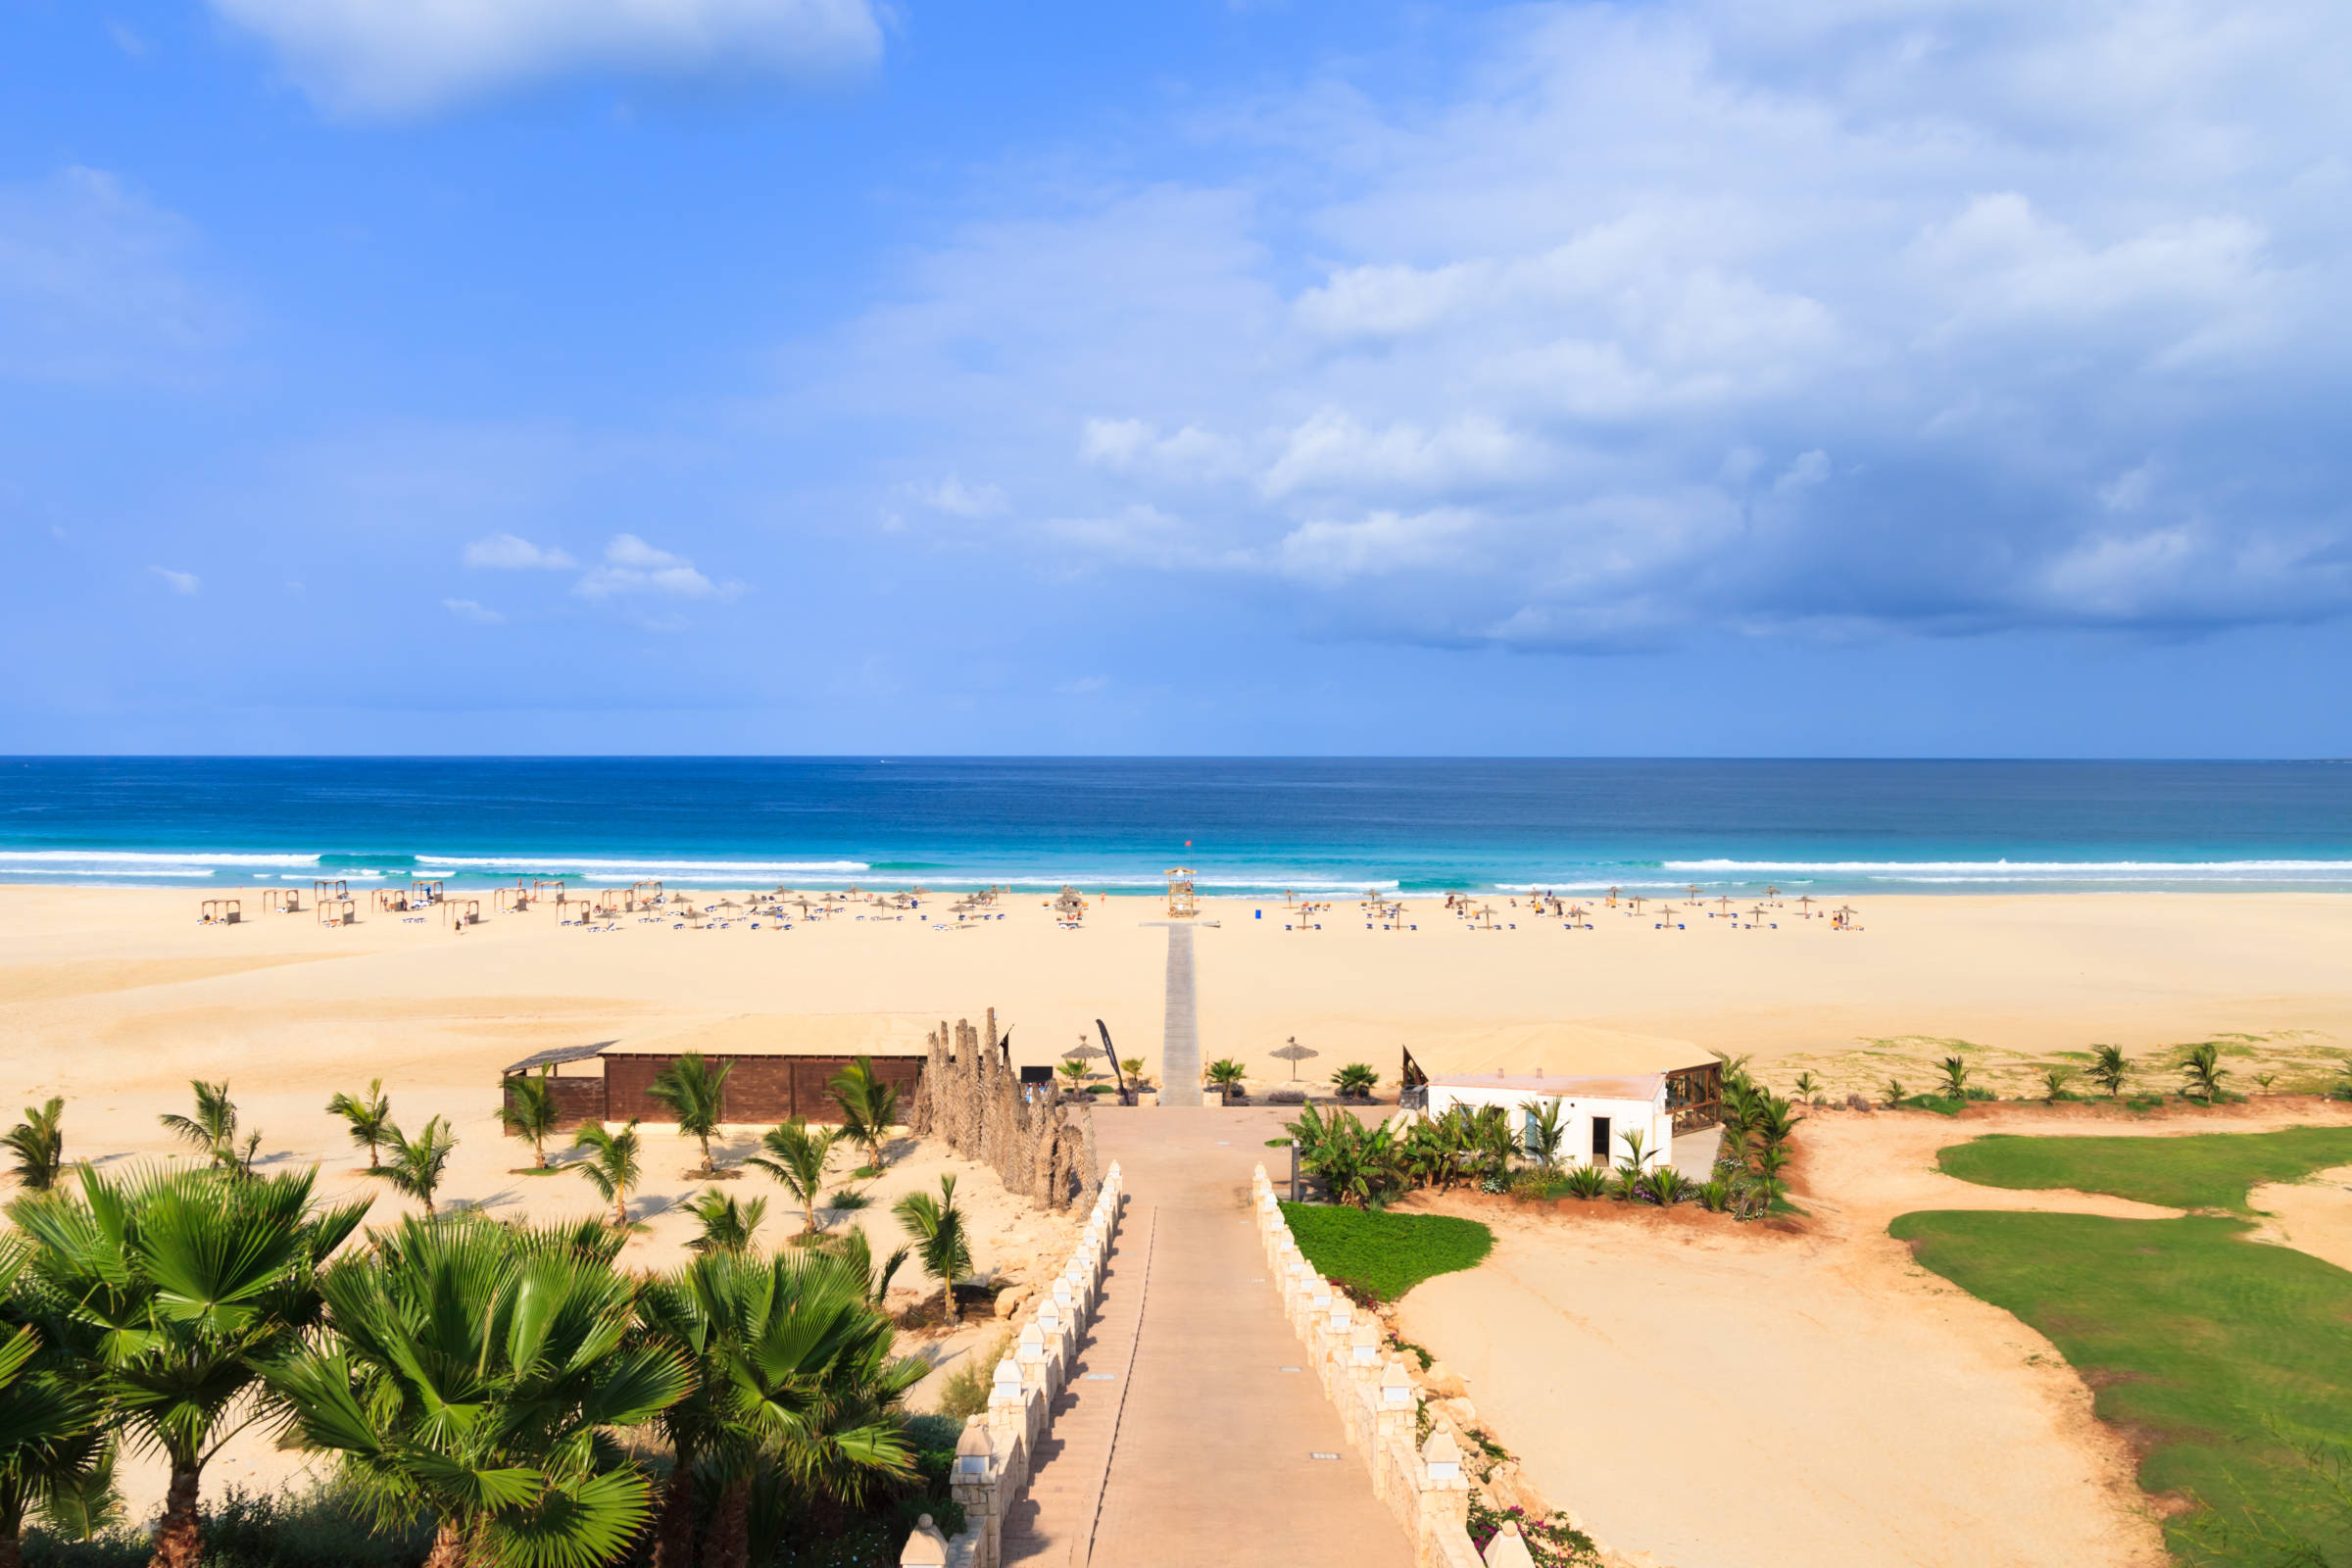 FOR NO STRESS FANS. The motto of Cape Verde is No Stress